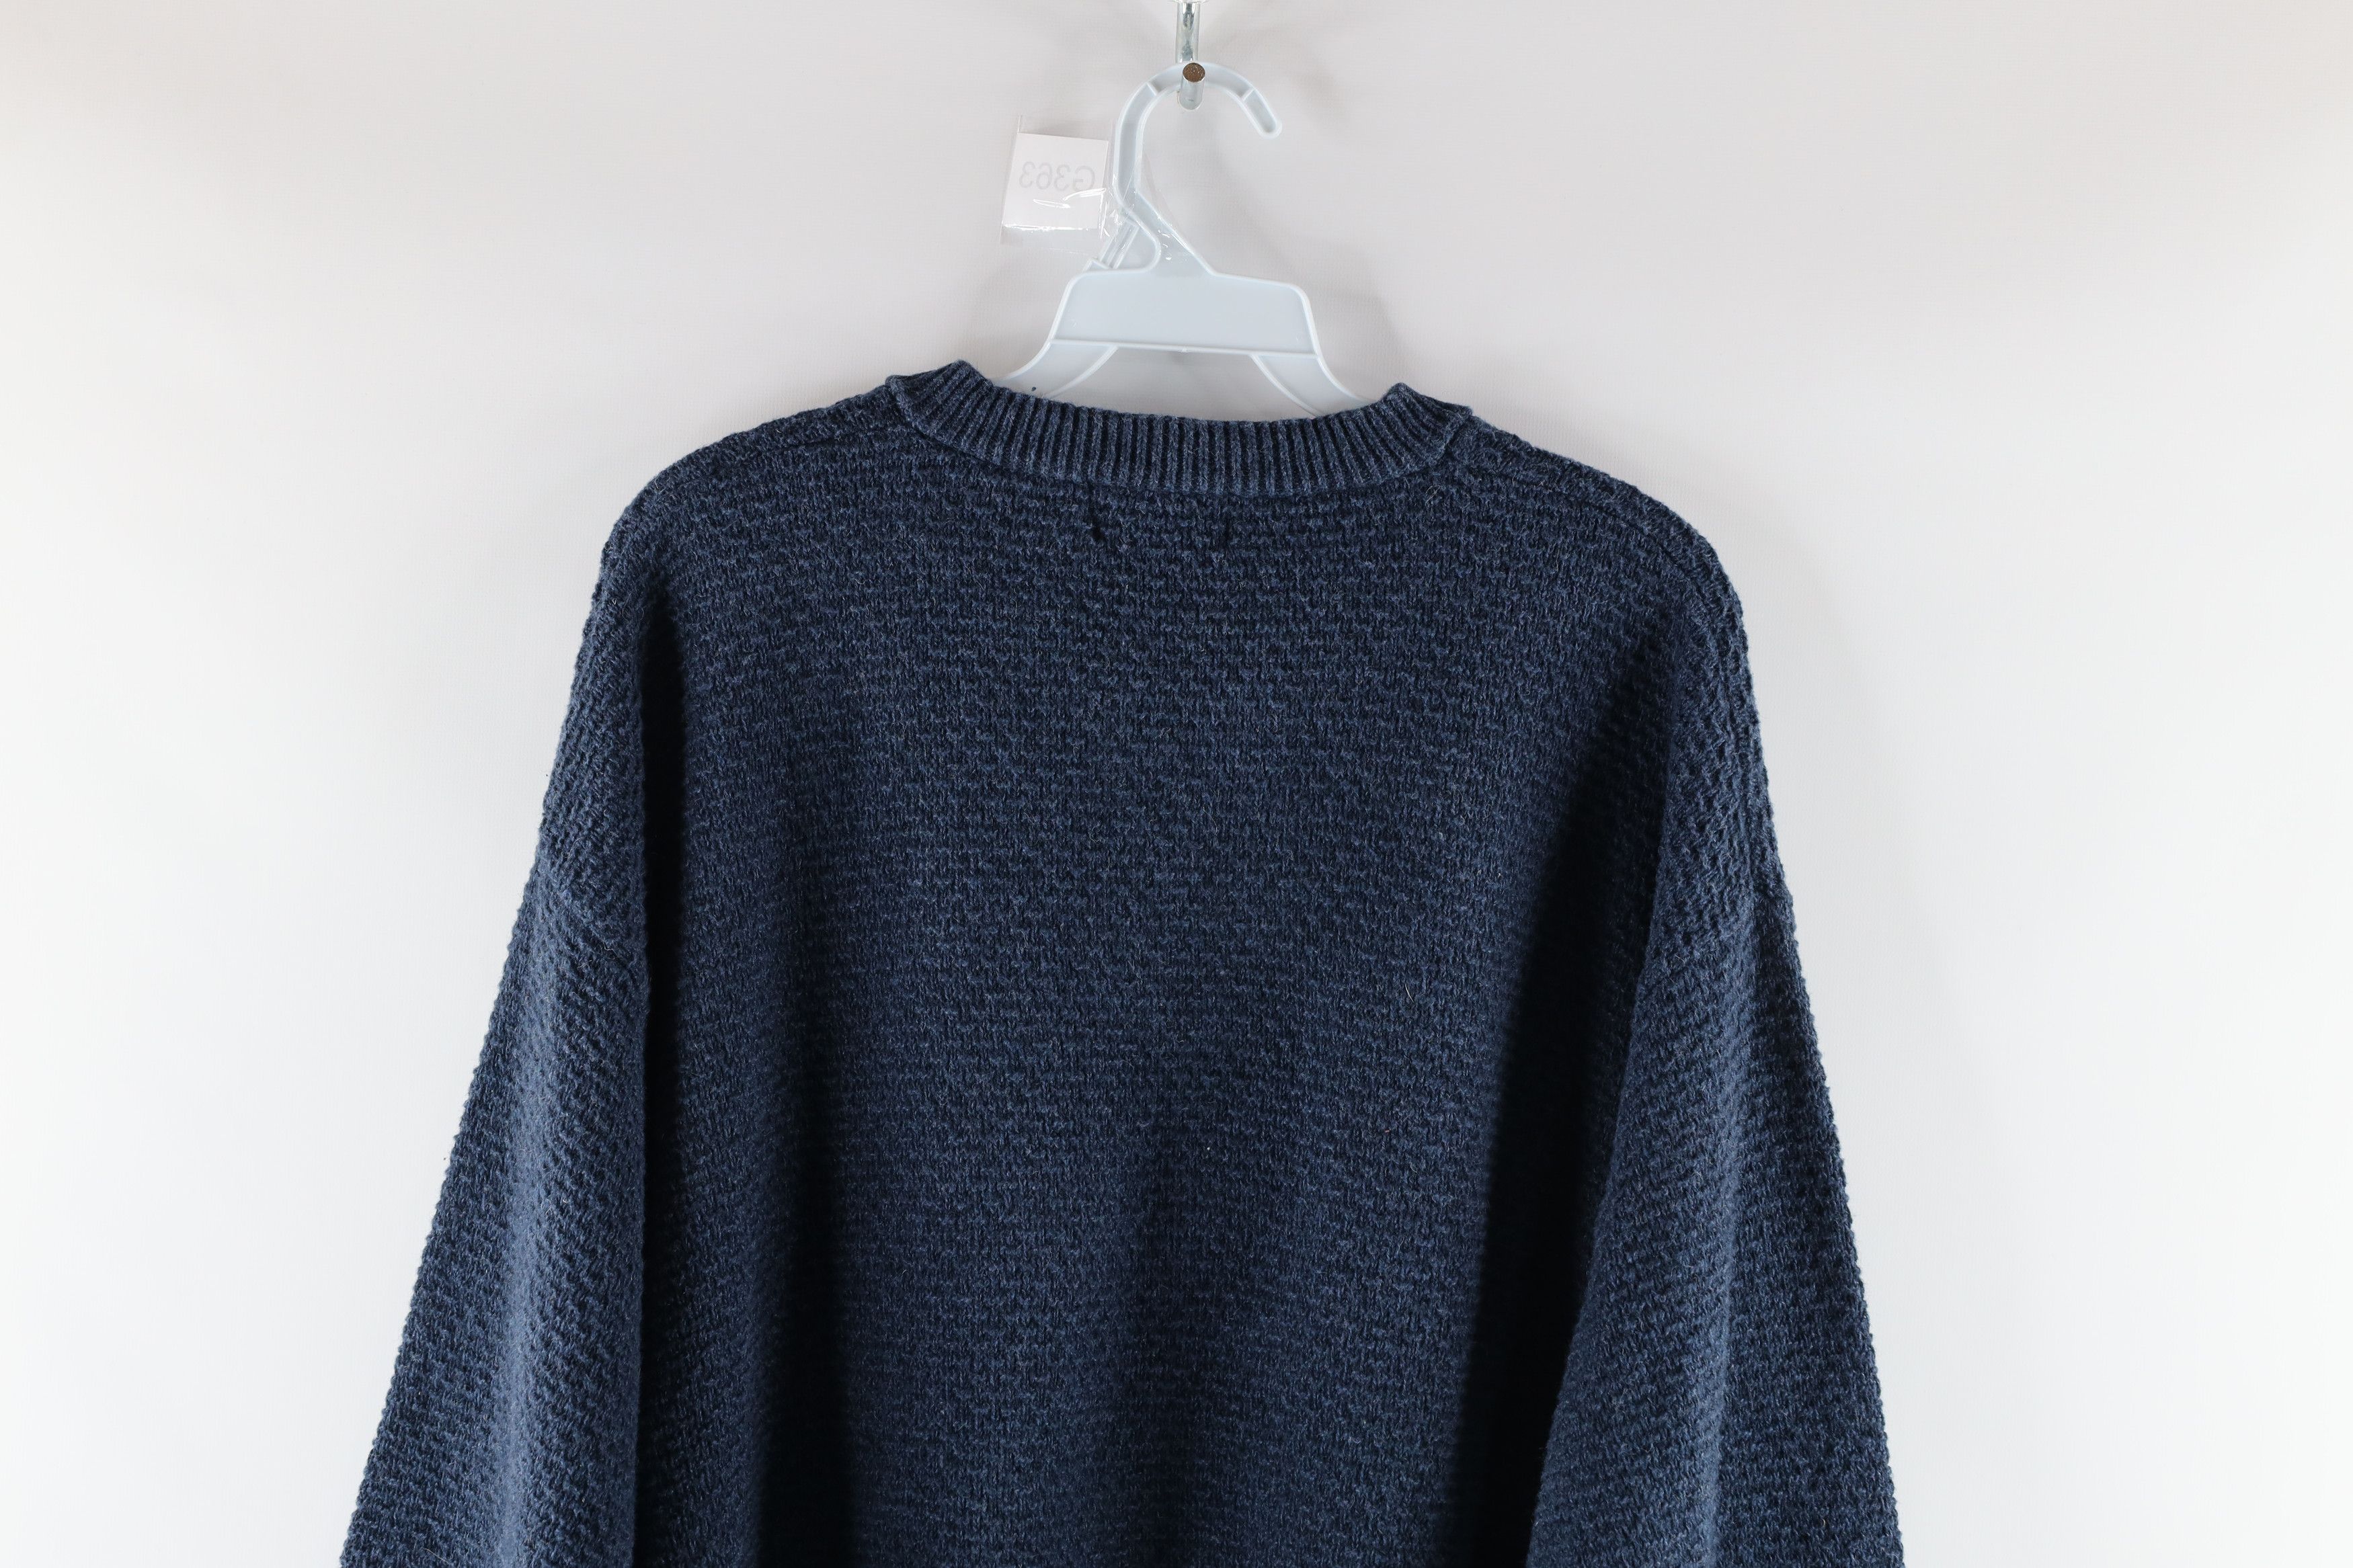 Vintage Vintage 90s Woolrich Blank Knit Pullover Henley Sweater Size US XL / EU 56 / 4 - 7 Thumbnail